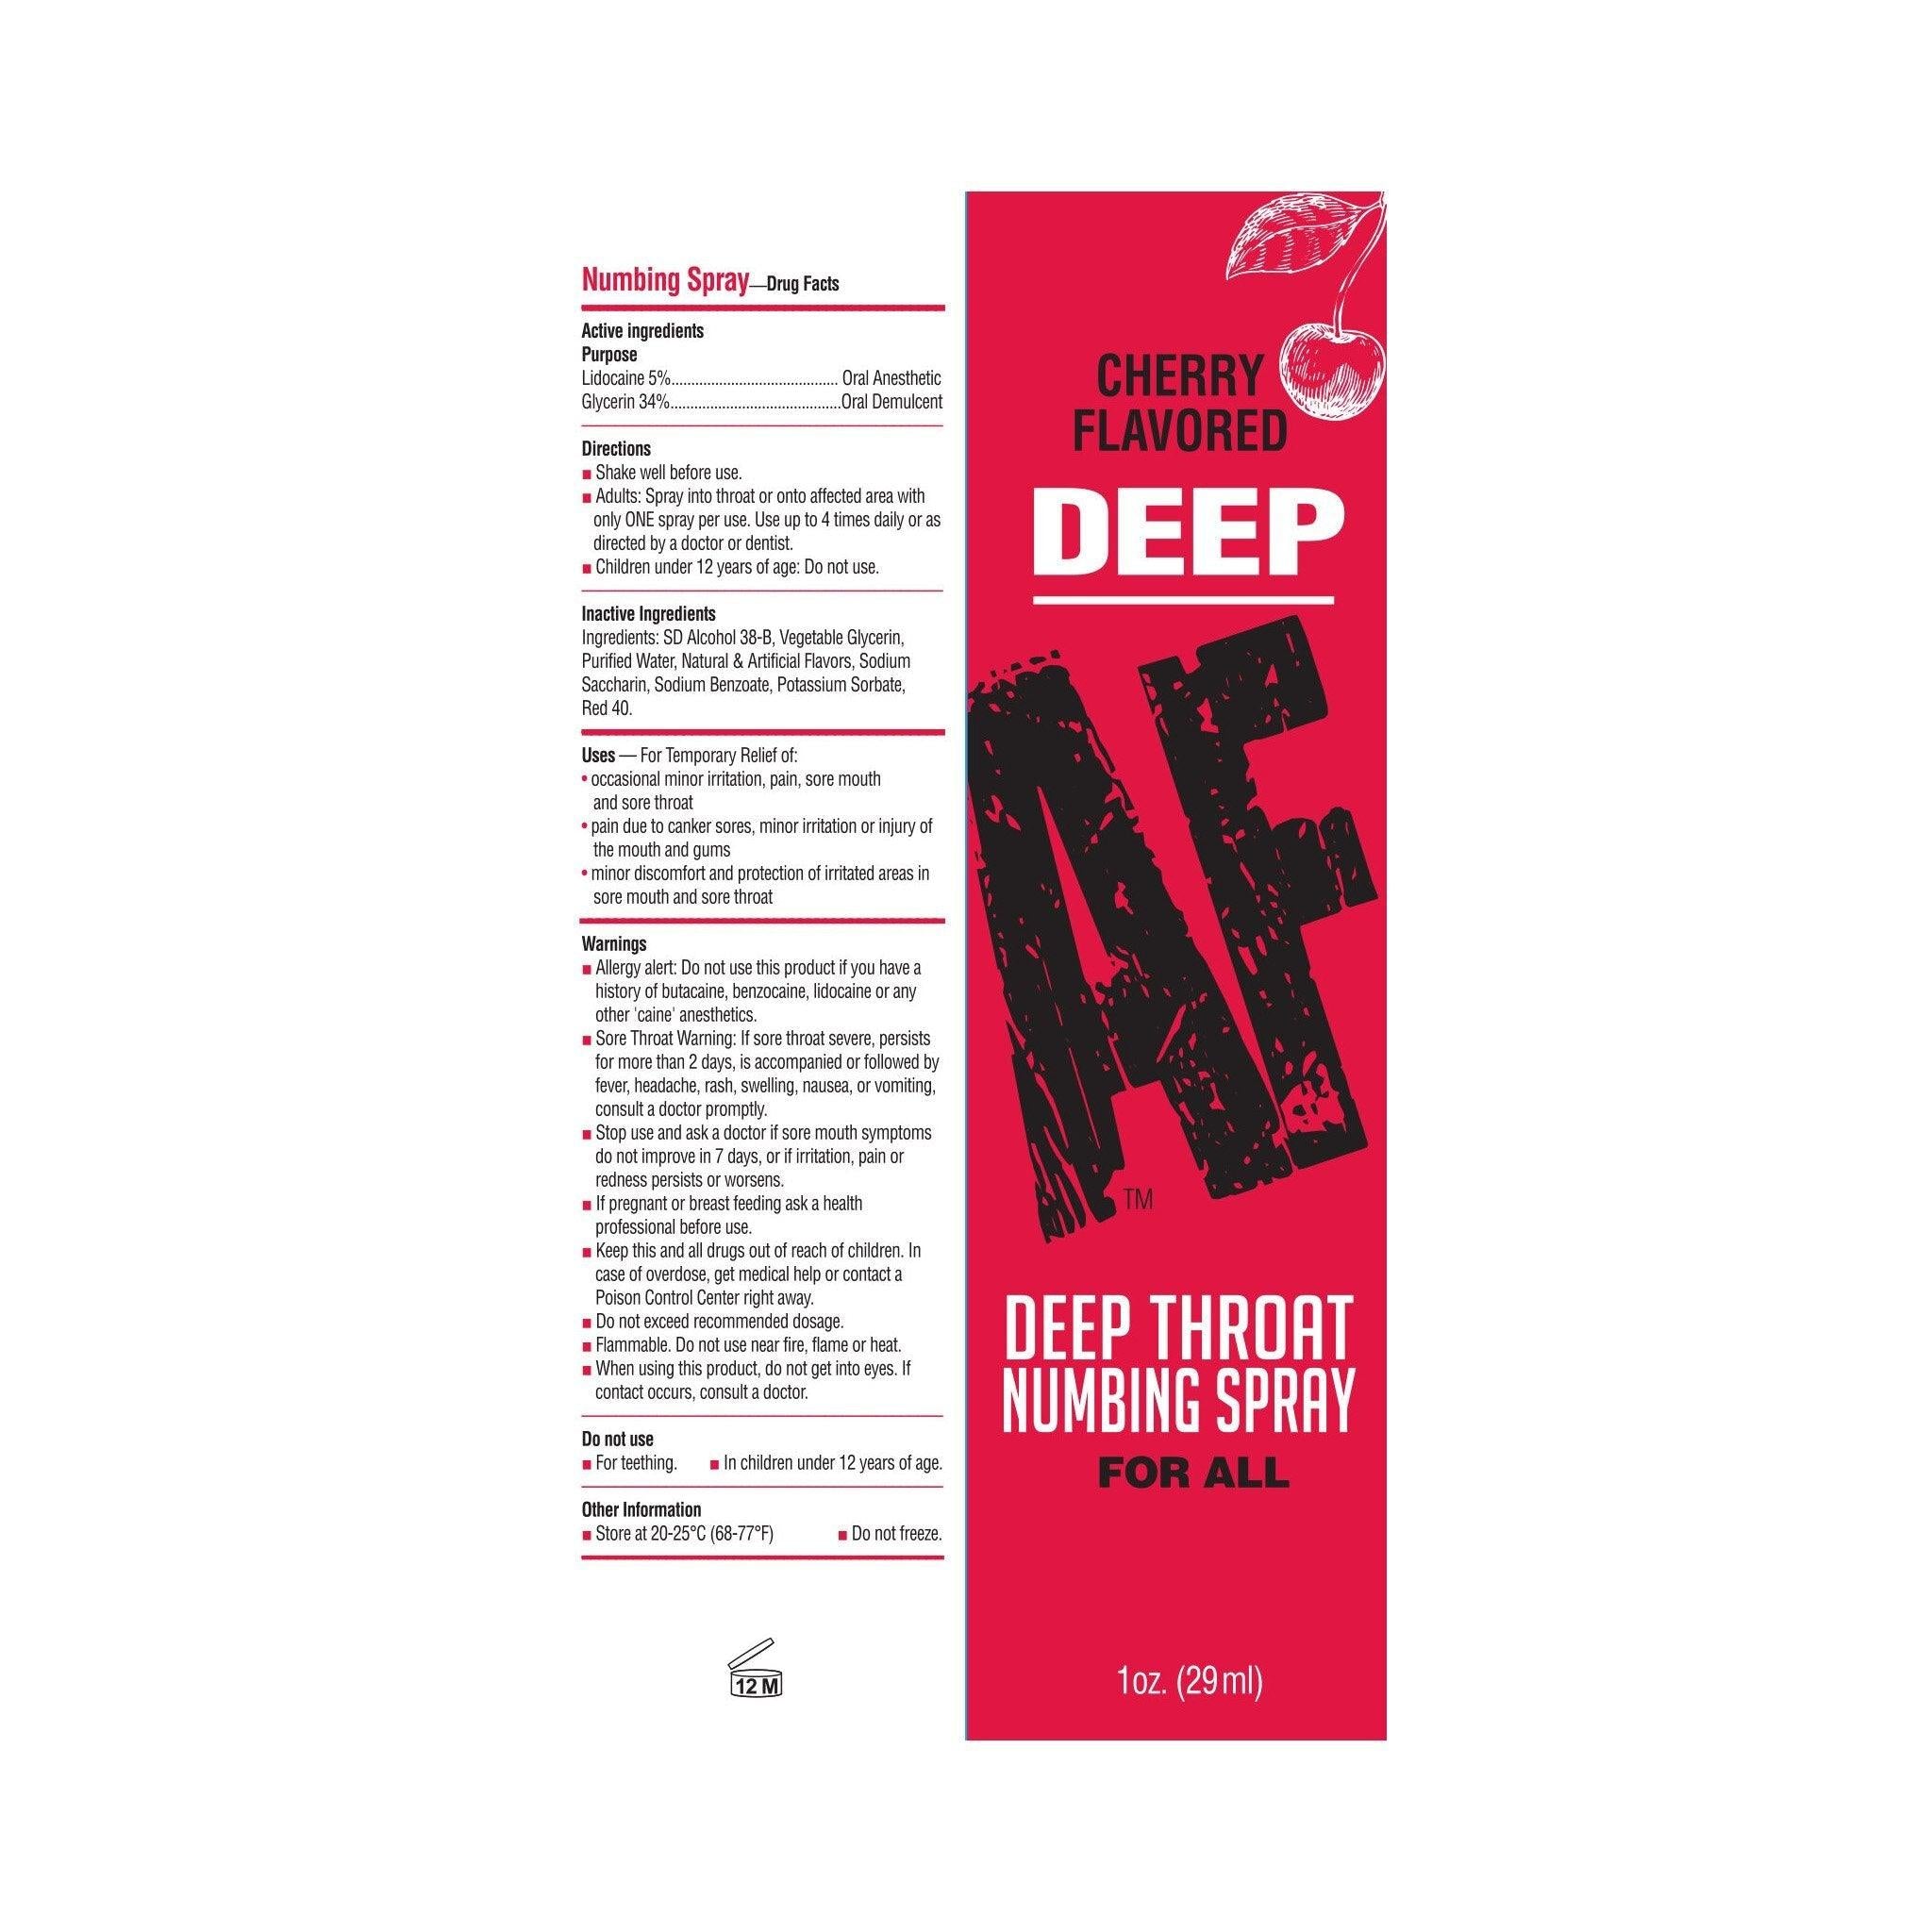 Deep AF Deep Throat Numbing Spray for All 1 oz (29 mL) - 2 Flavors to Choose From - CheapLubes.com